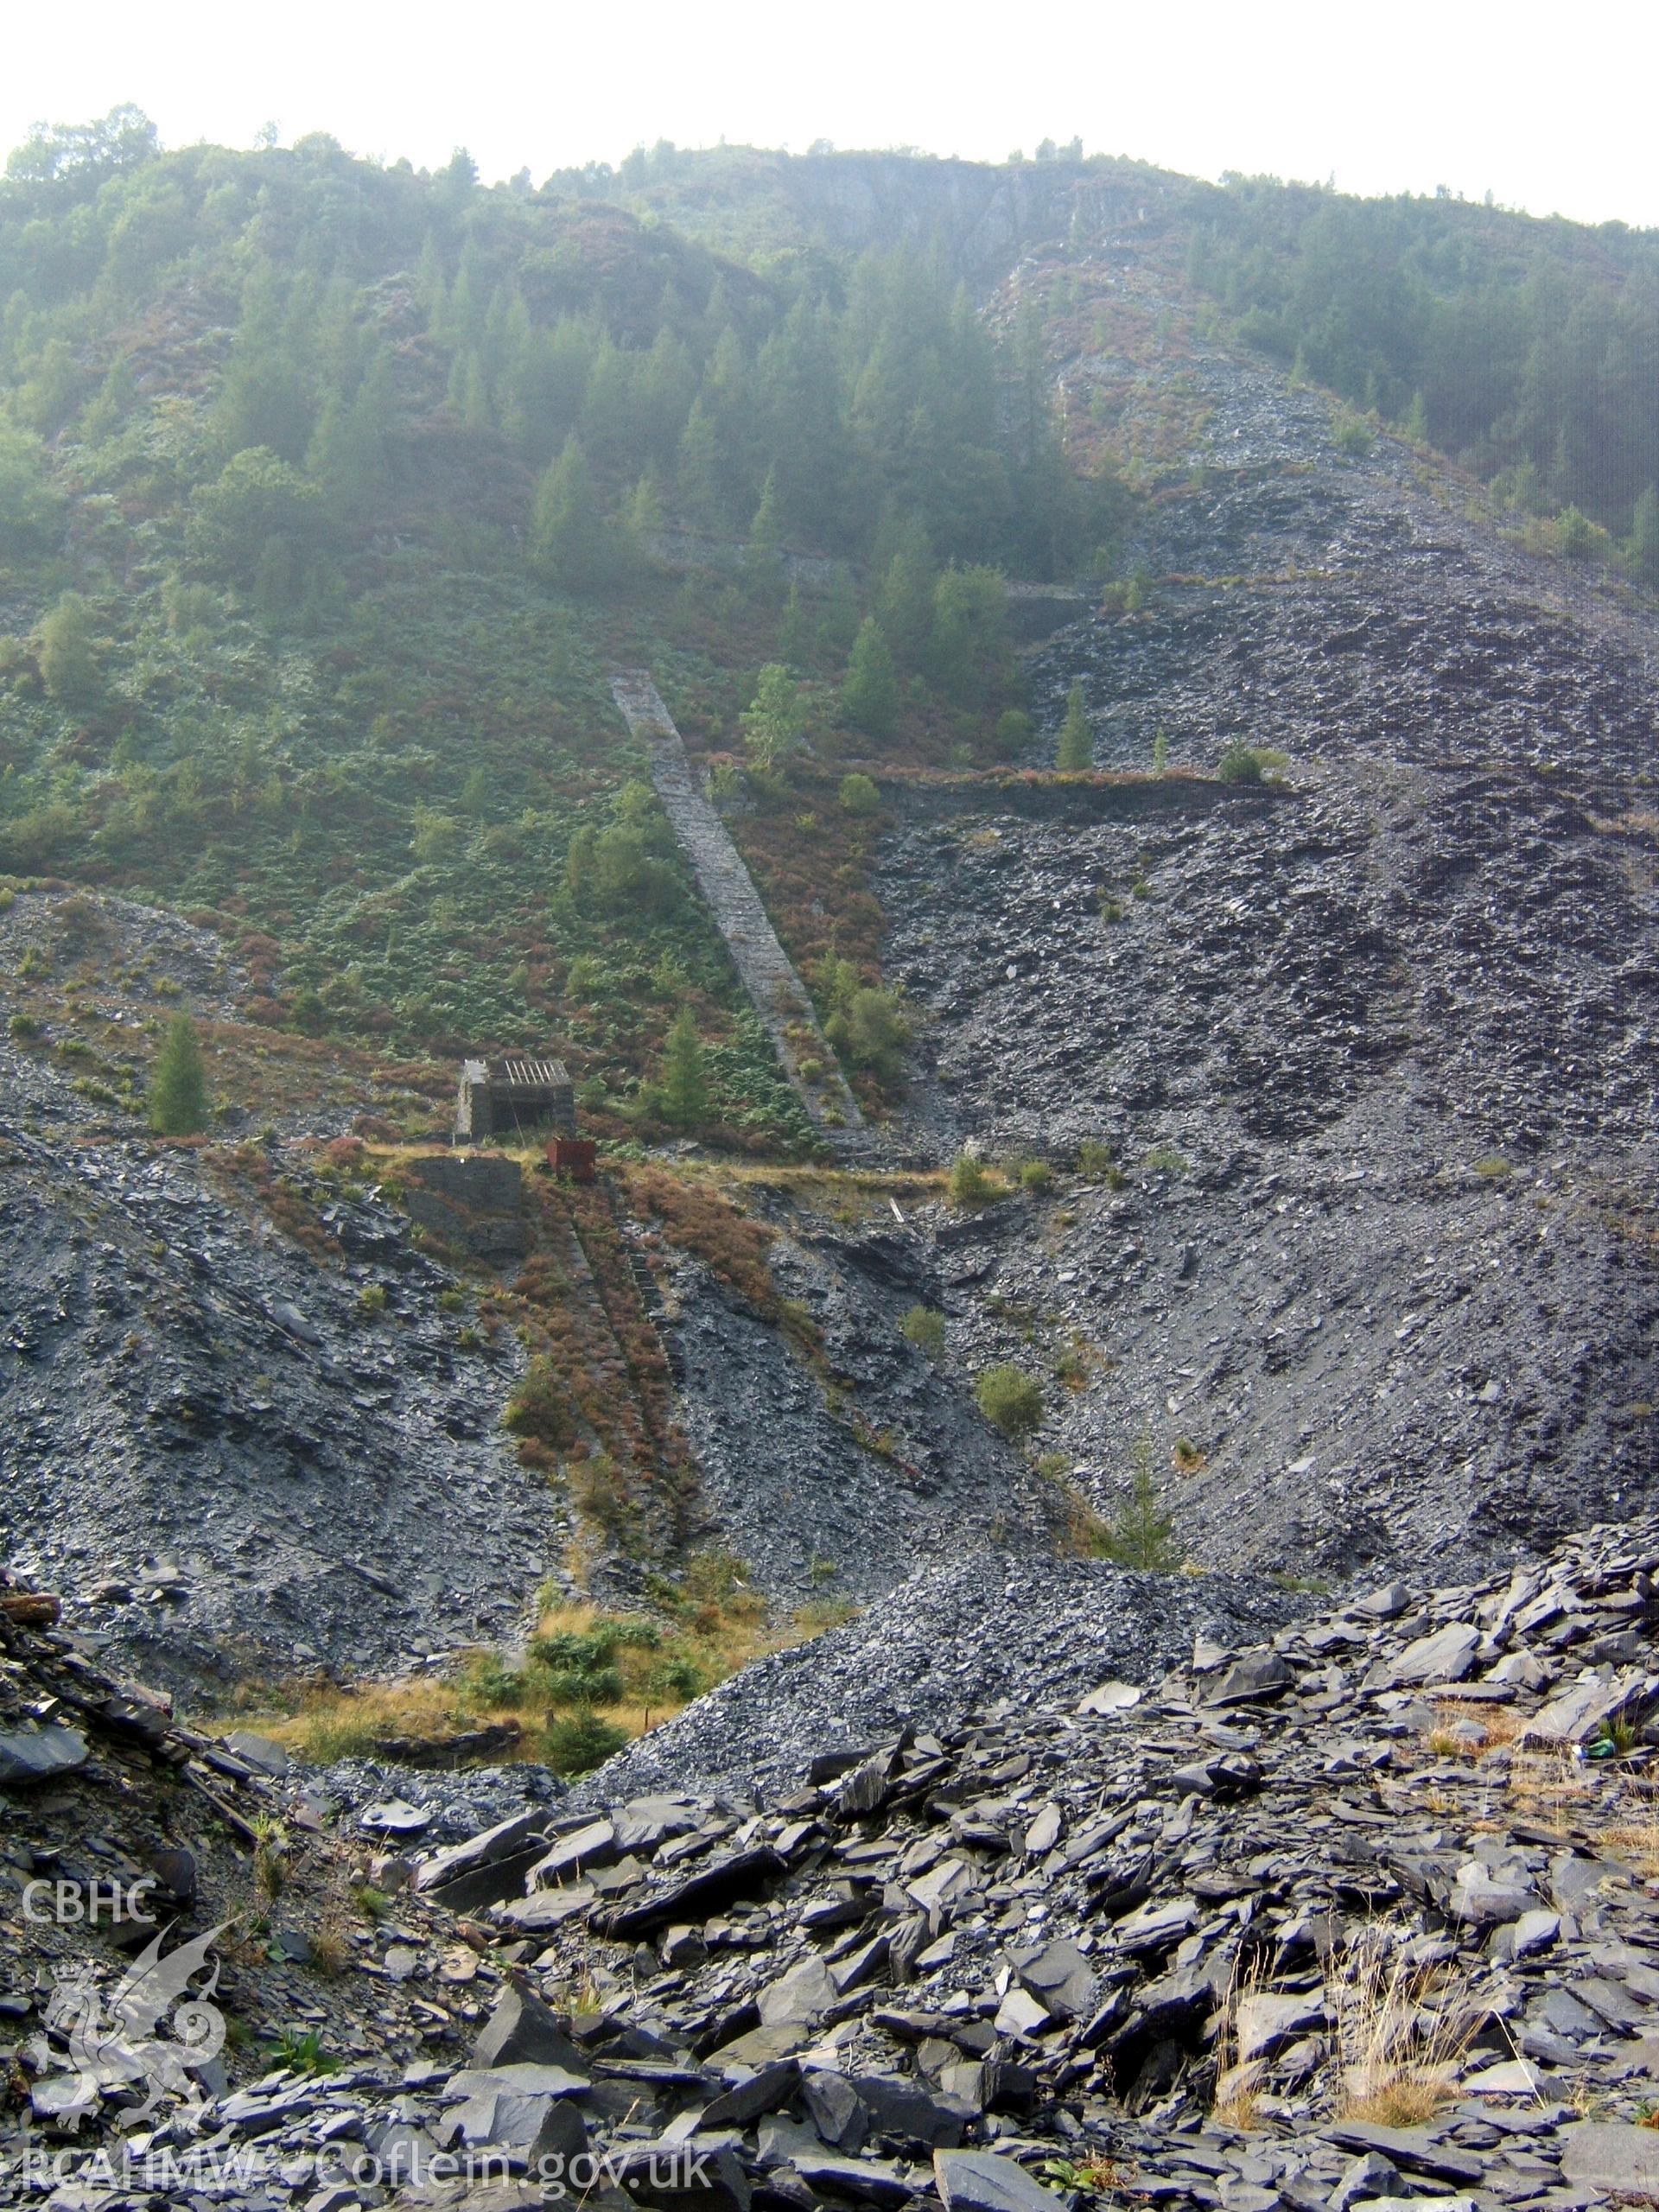 Lower approach to high inclines from the north-east.